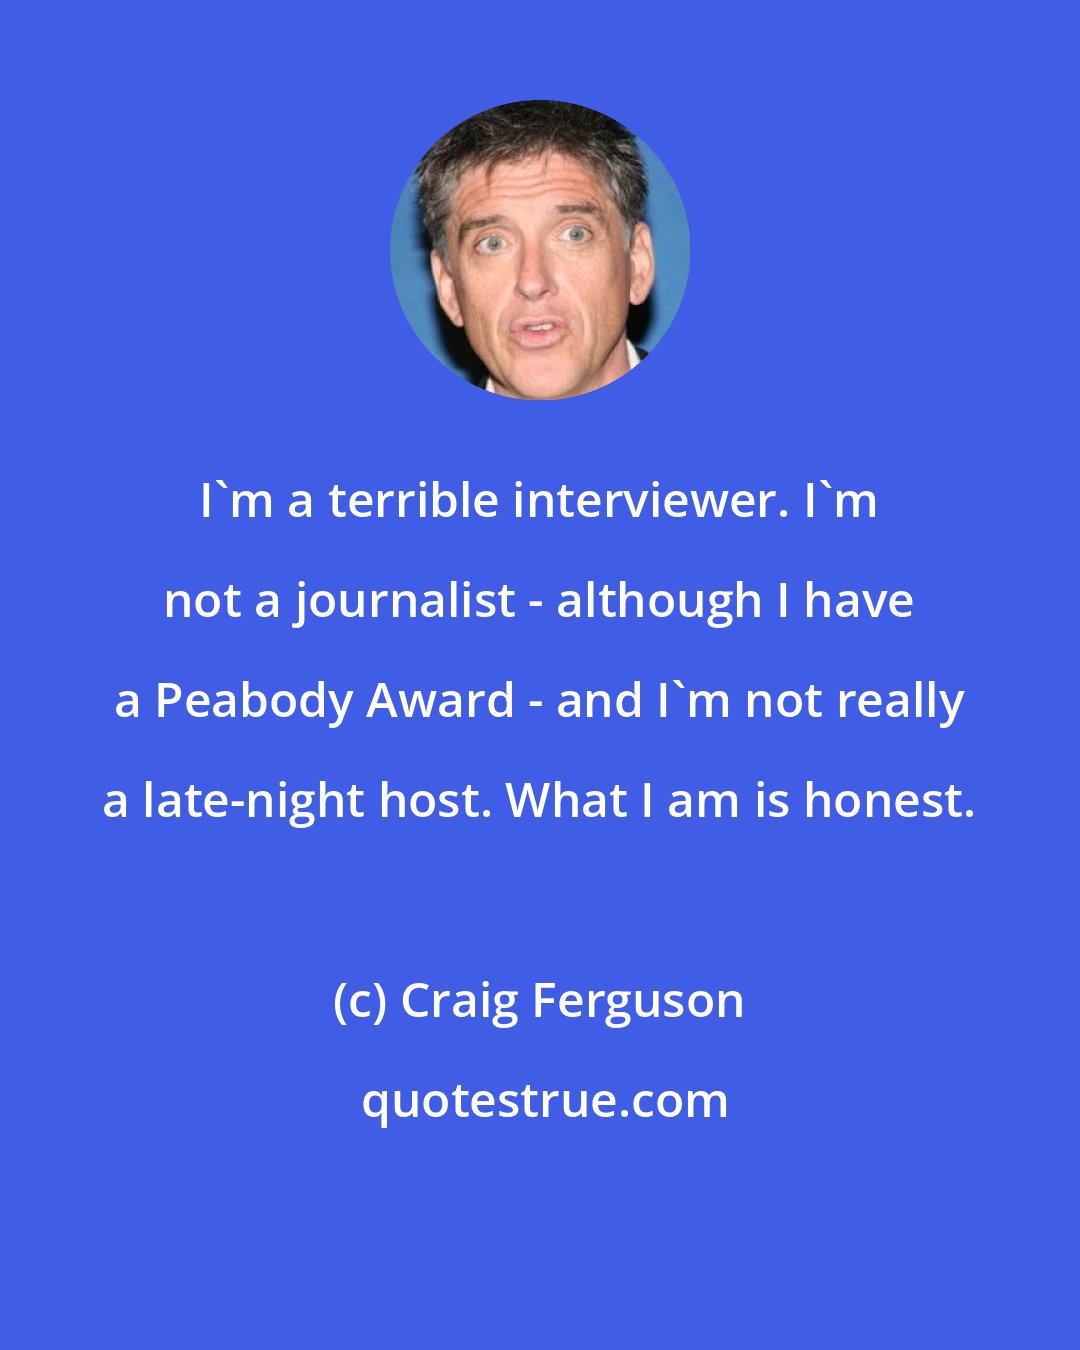 Craig Ferguson: I'm a terrible interviewer. I'm not a journalist - although I have a Peabody Award - and I'm not really a late-night host. What I am is honest.